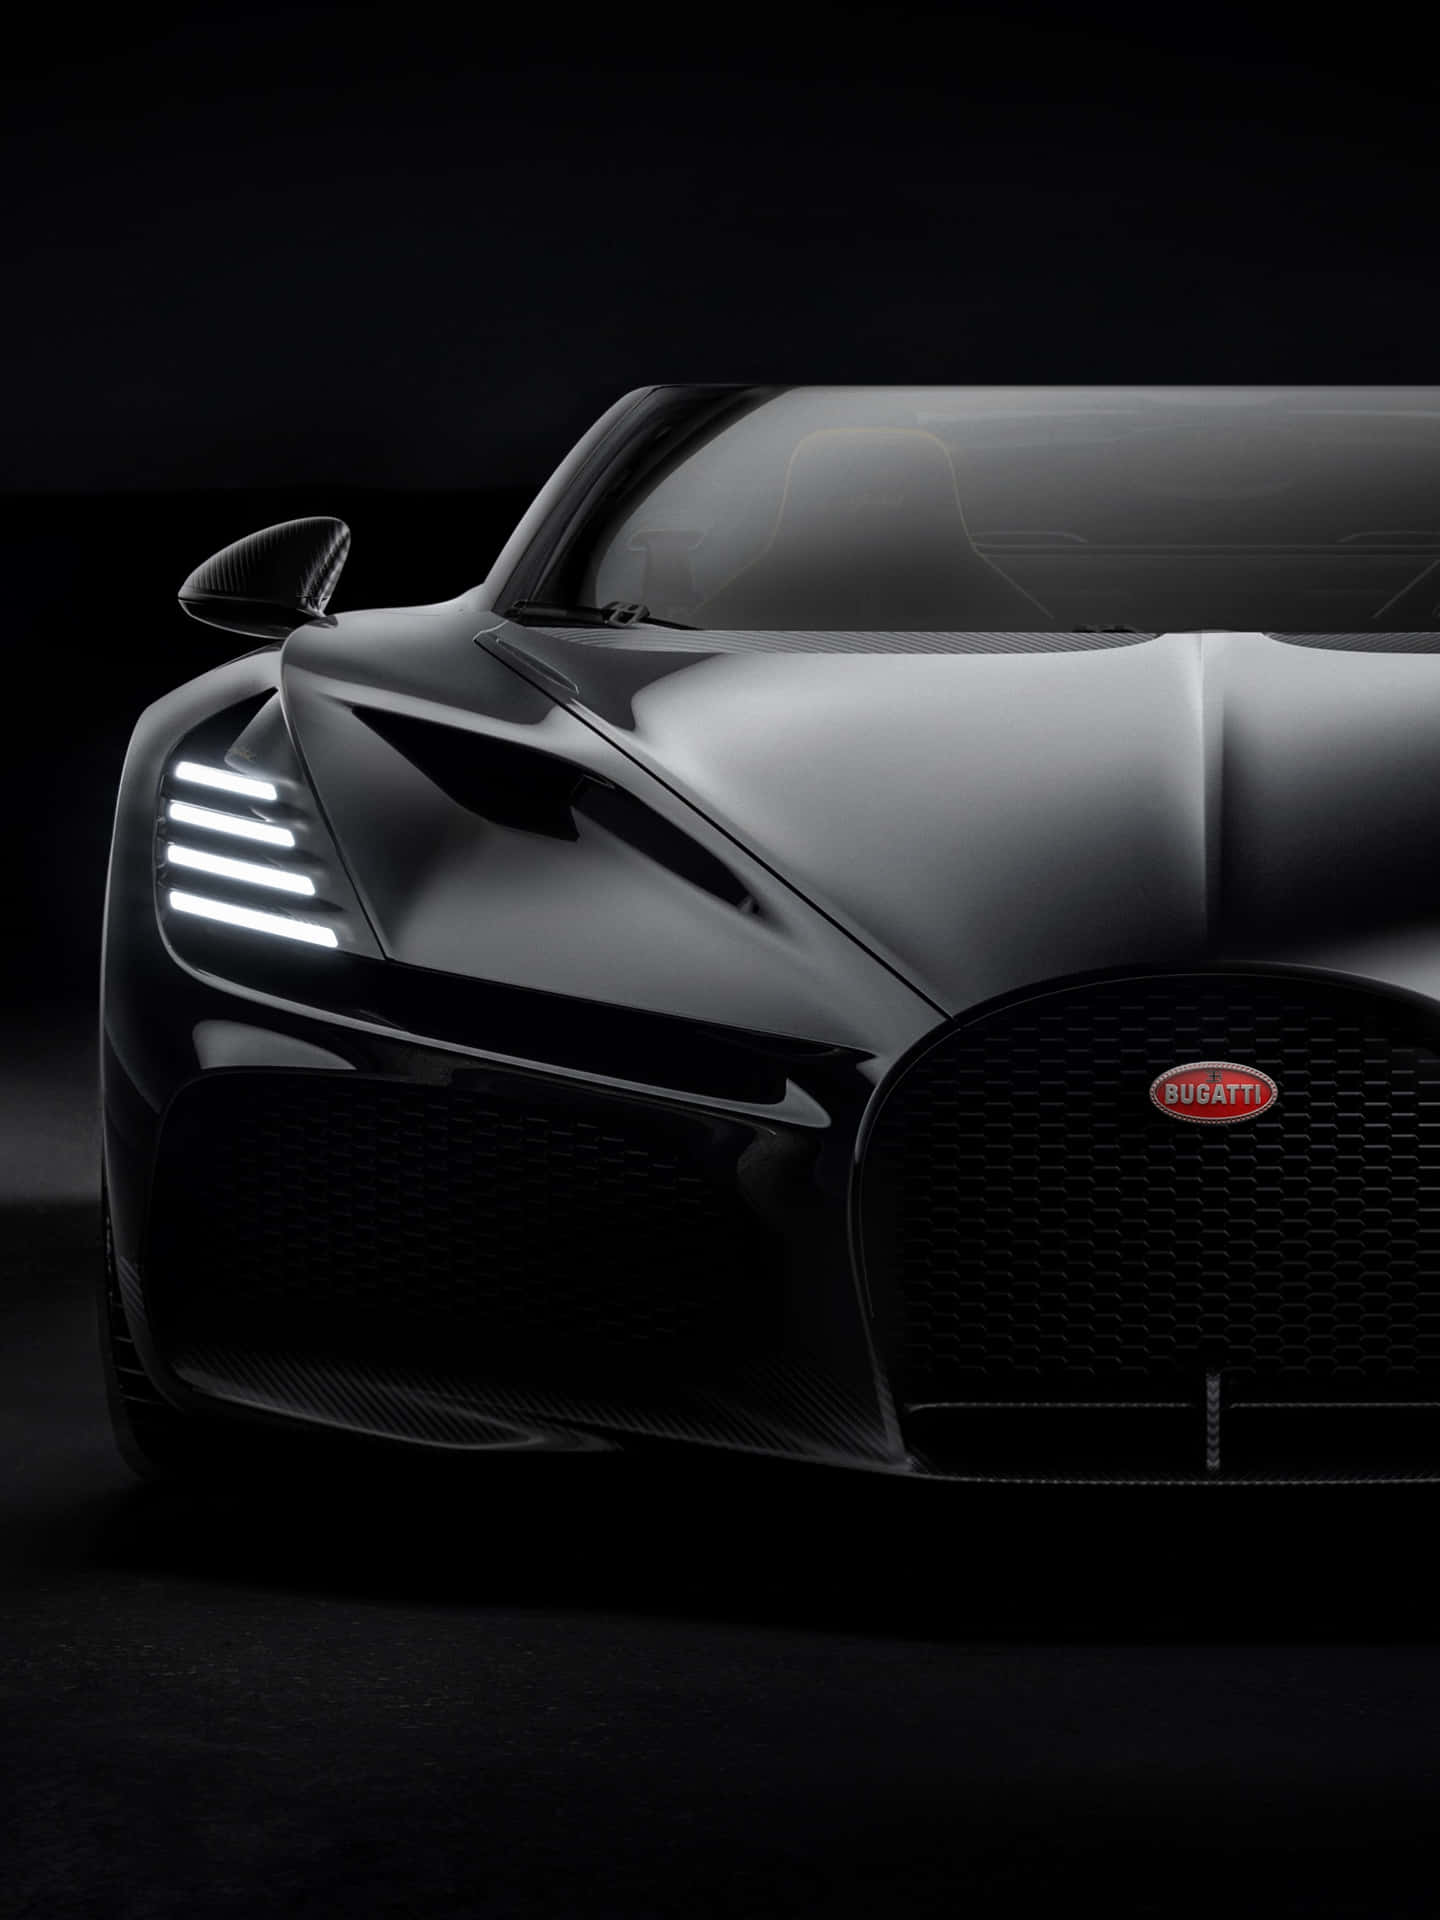 Experience speed with the Bugatti Phone Wallpaper